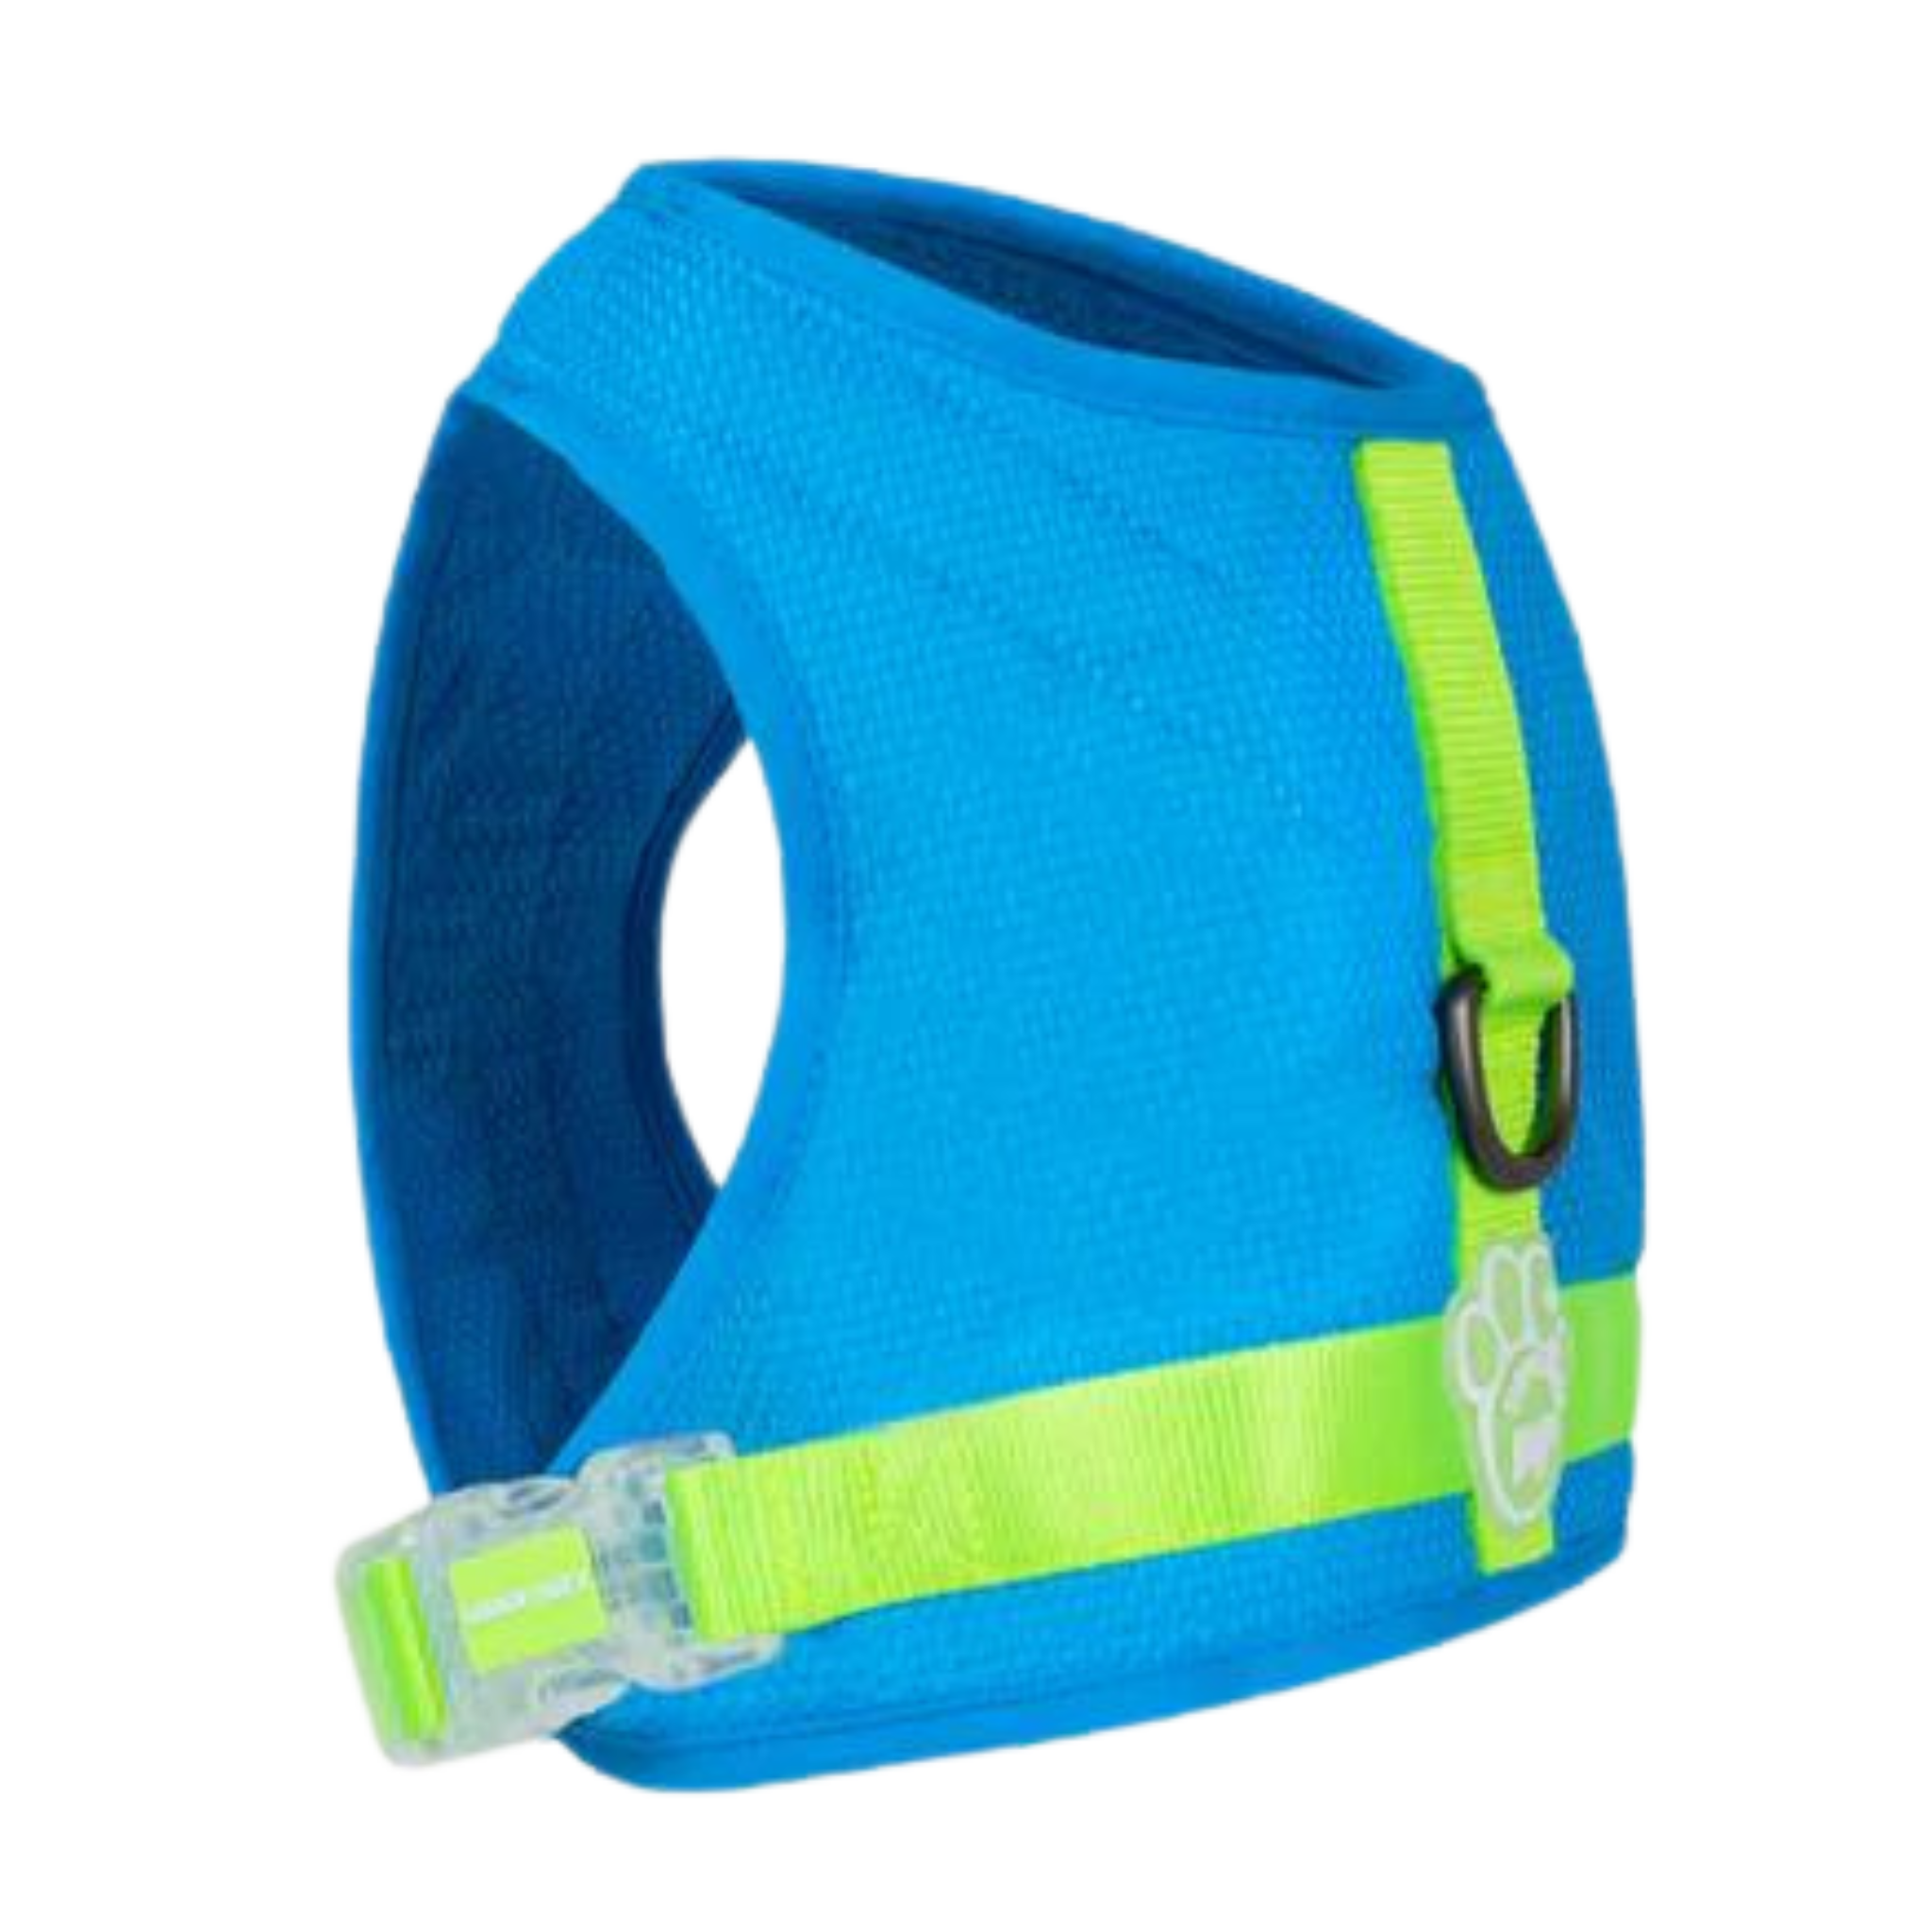 Canada Pooch Chill Seeker Cooling Dog Harness Blue - Mutts & Co.